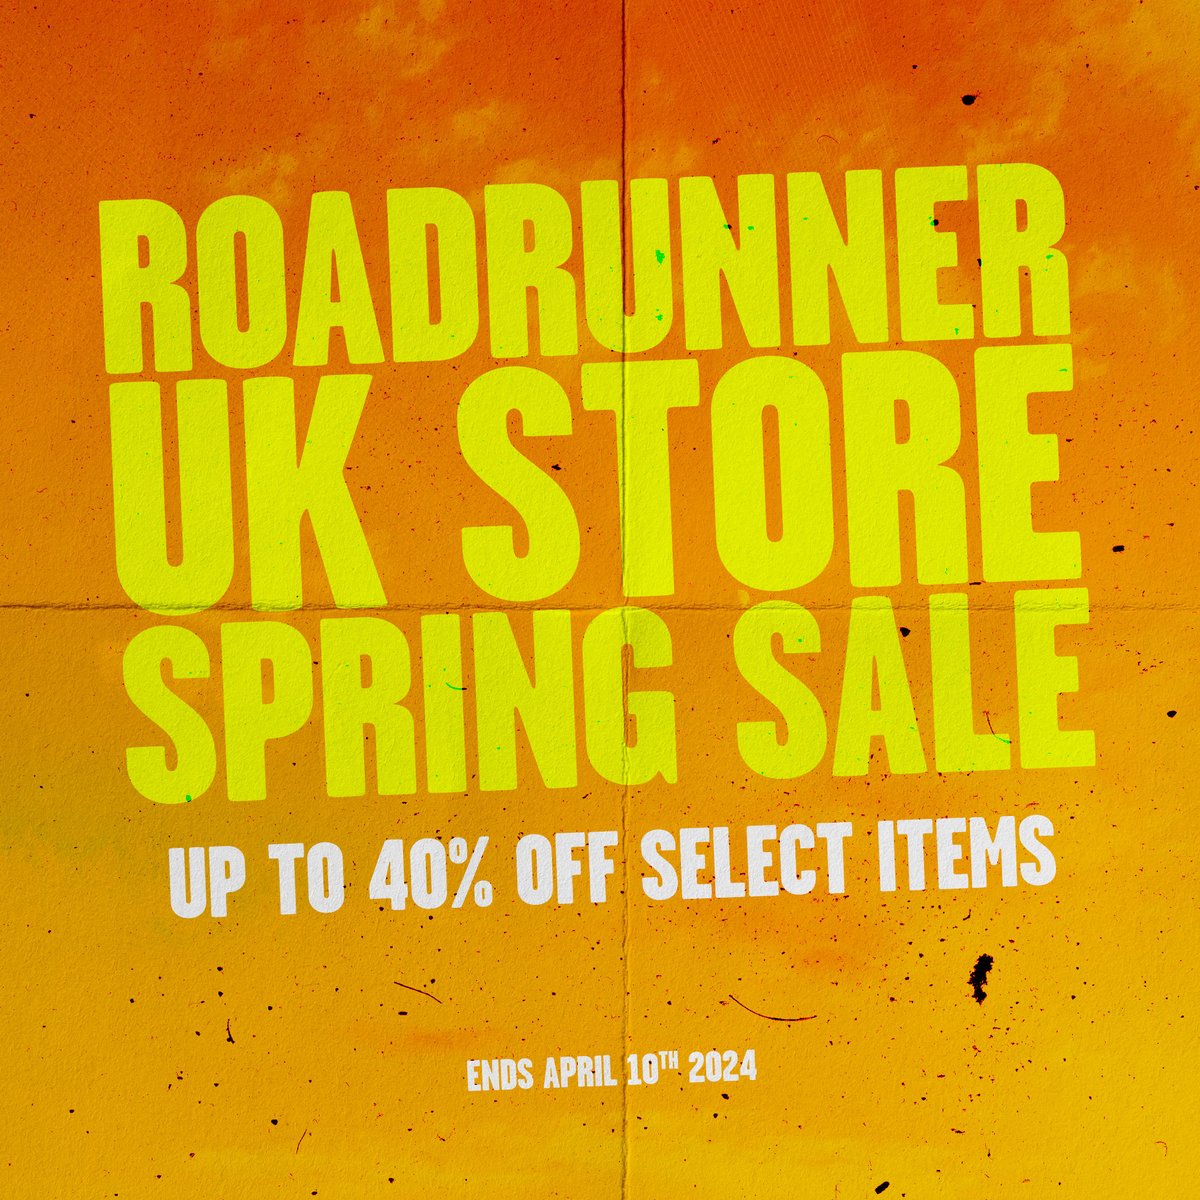 The Roadrunner UK Store Spring Sale is now on! Get up to 40% off select items - offer ends April 10th ⏰ Visit the store now - shop.roadrunnerrecords.co.uk/gb/roadrunner-…